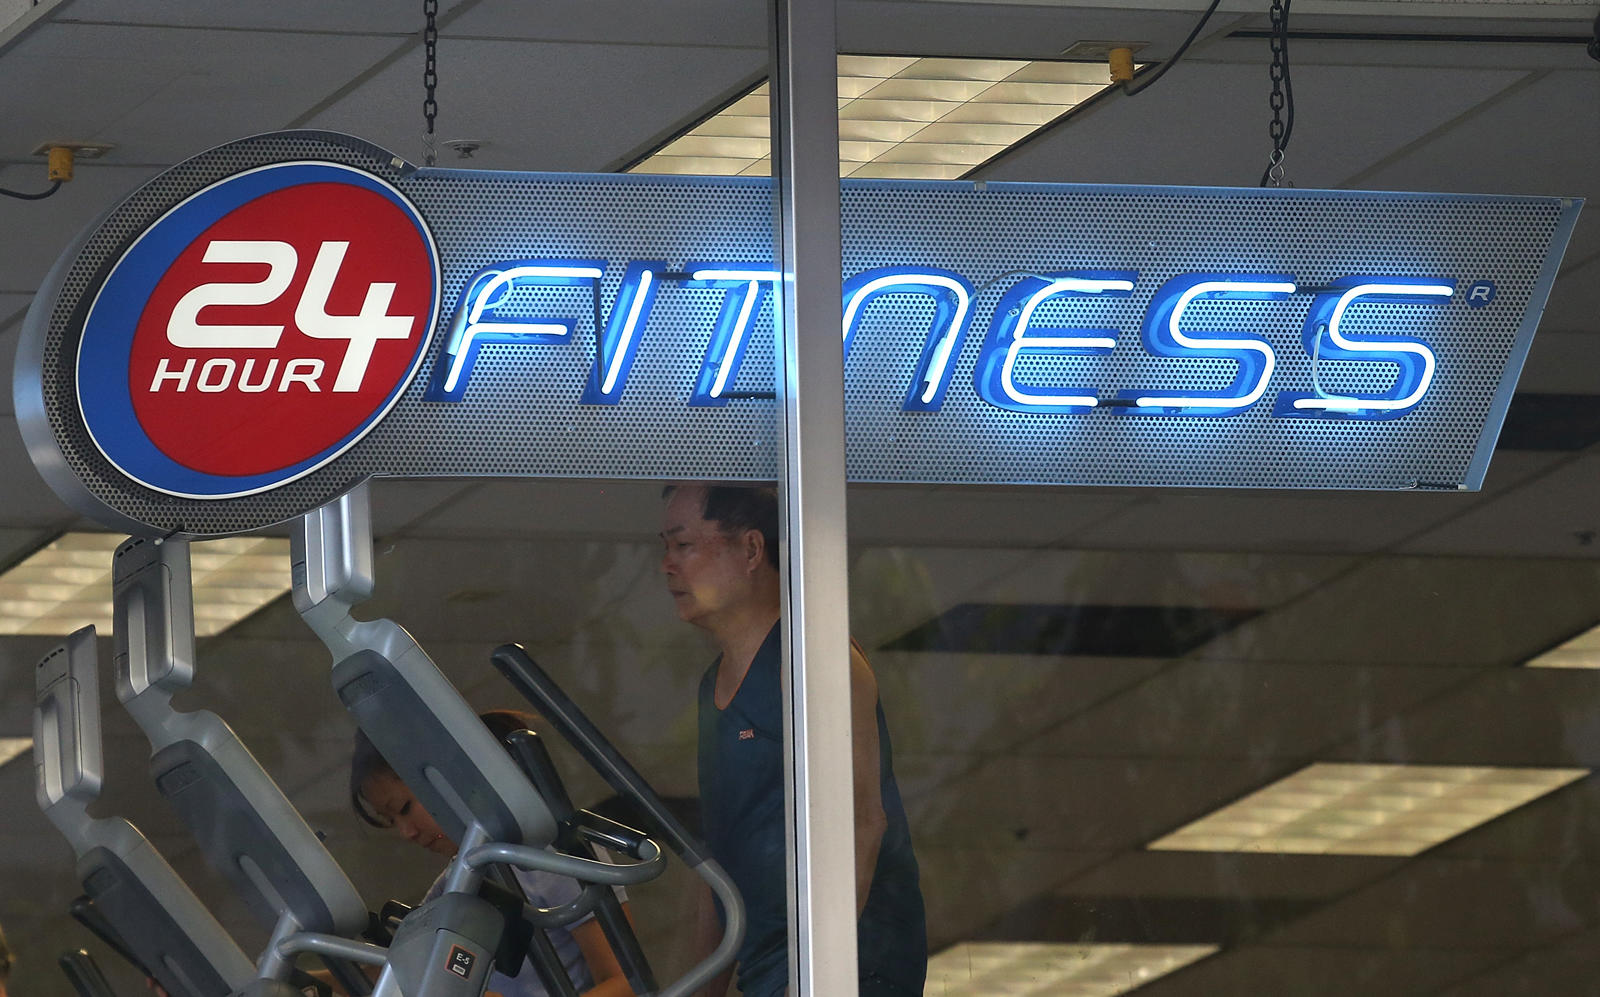 24 Hour Fitness is preparing for a possible bankruptcy filing even as it begins reopening locations. (Getty)